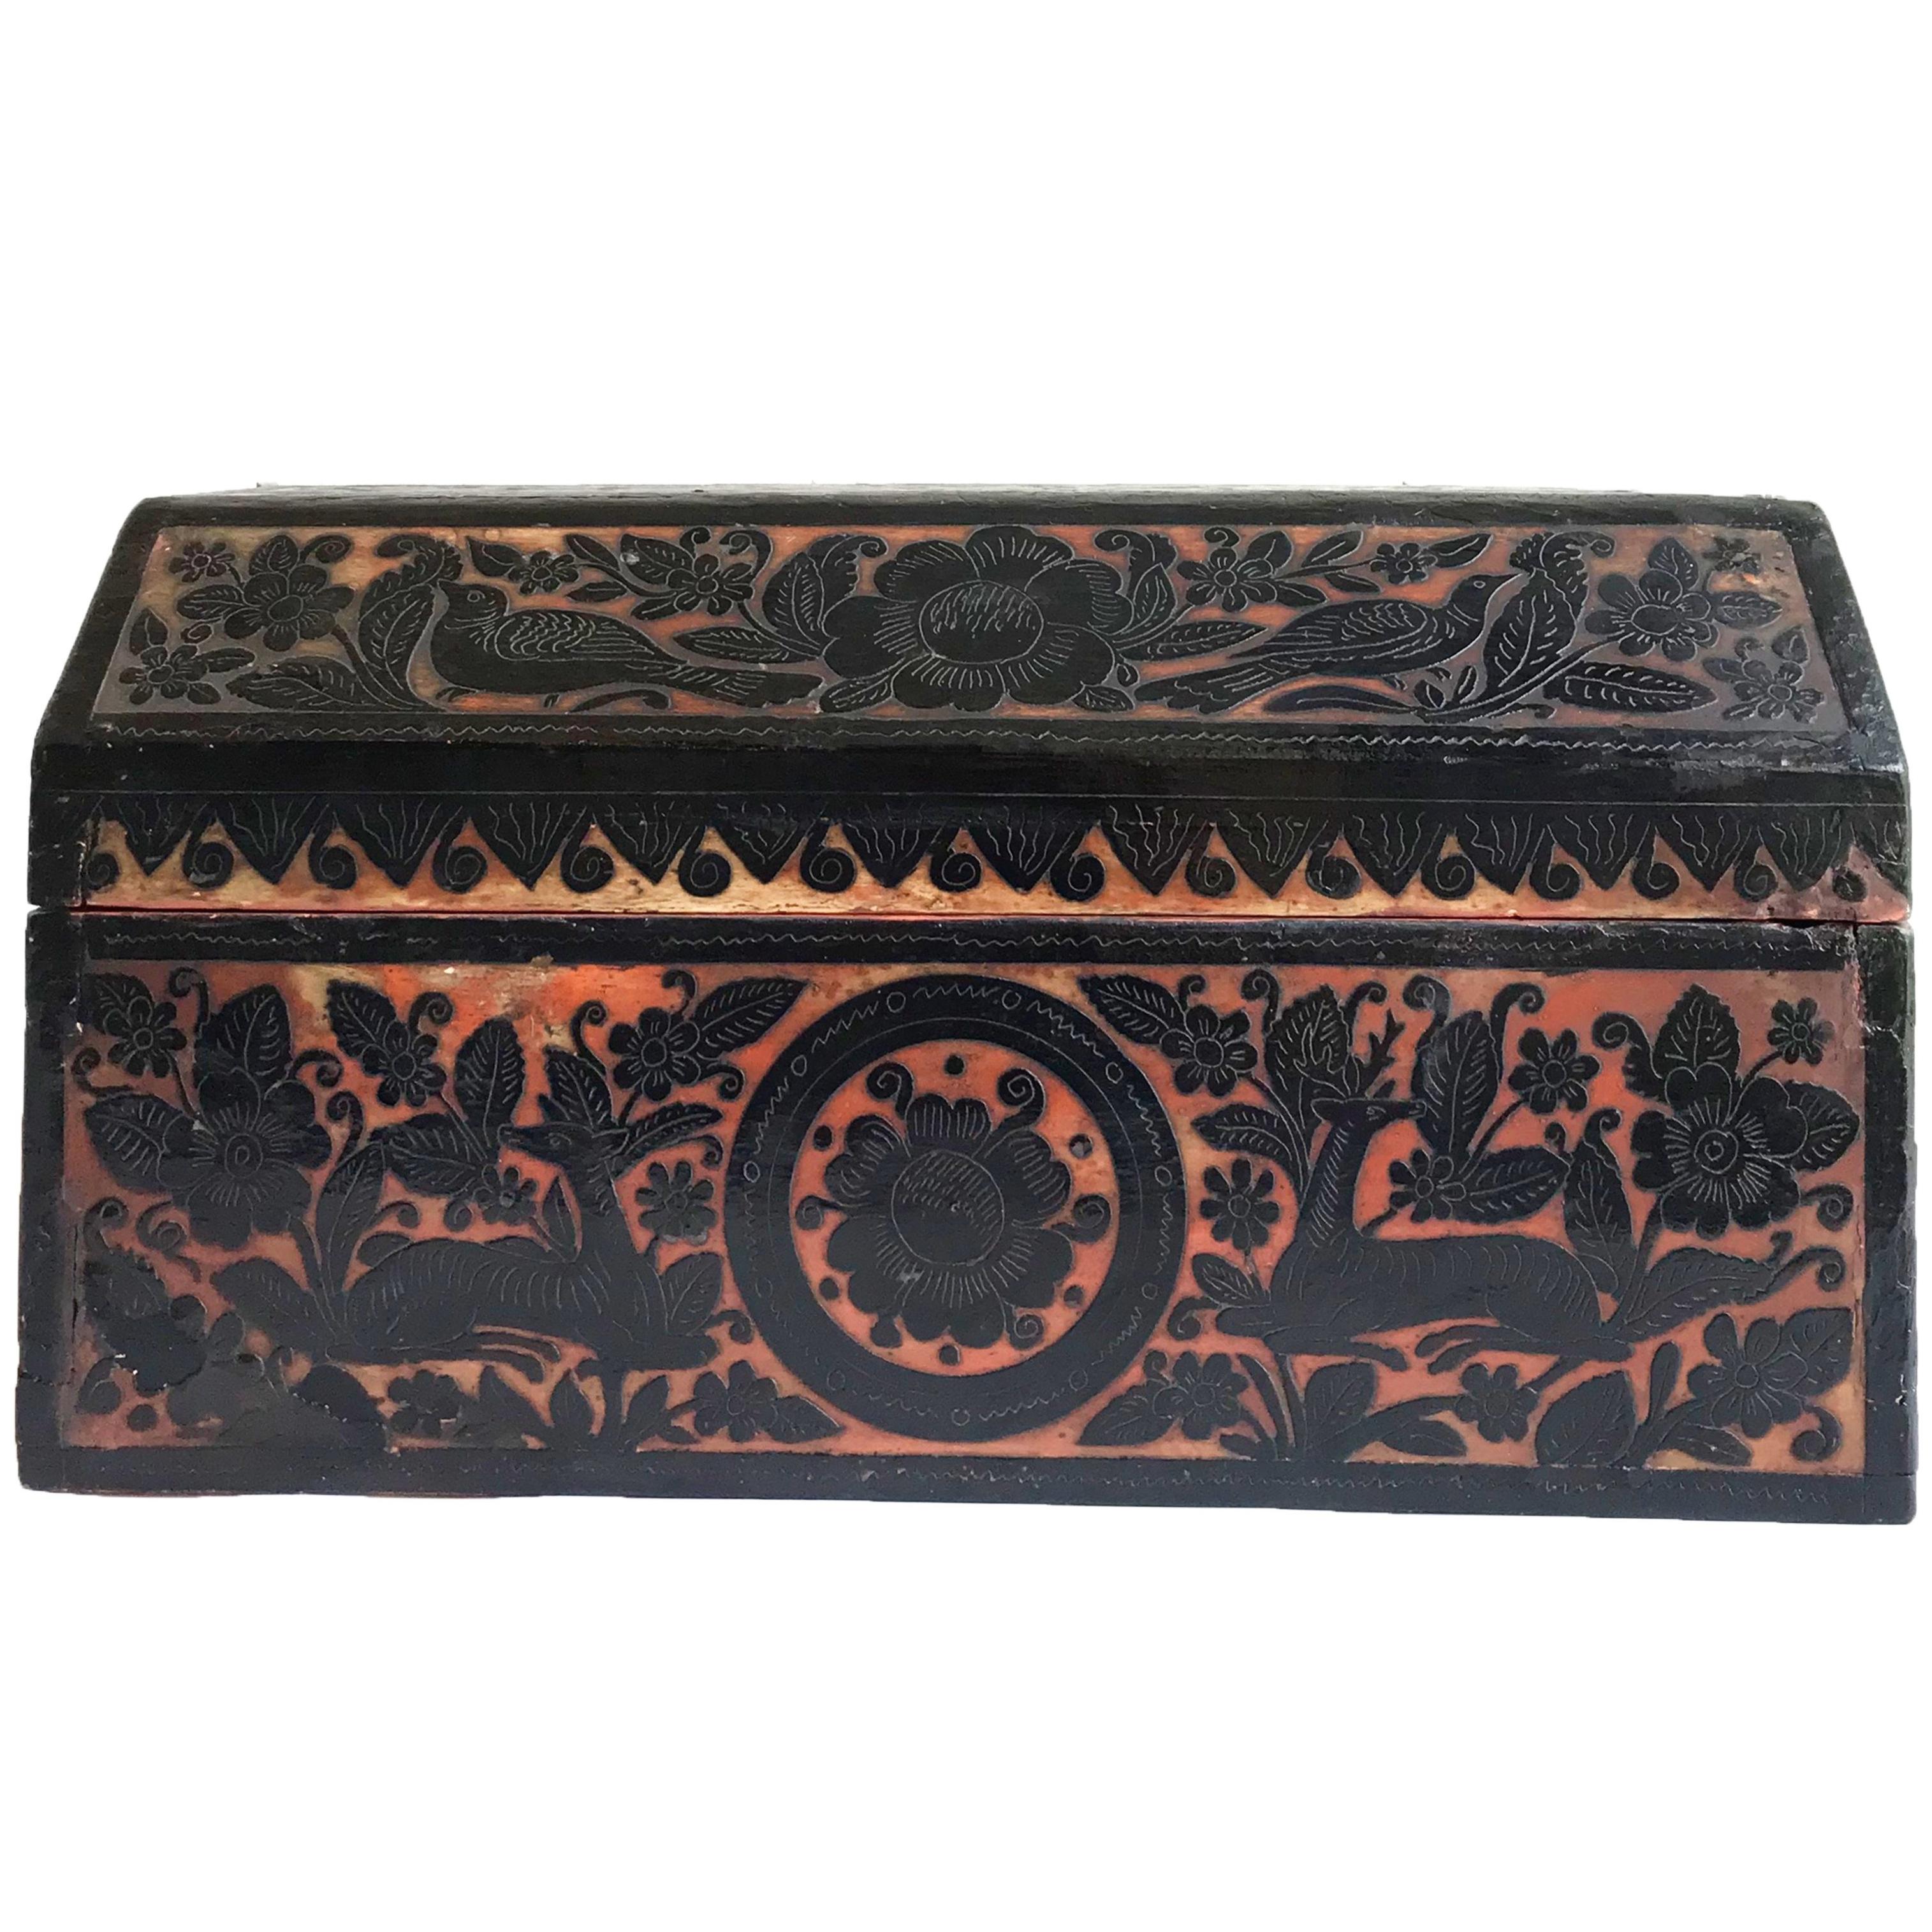 Early 19th Century American Carved Lacquered Folk Art Wooden Box from Tennessee